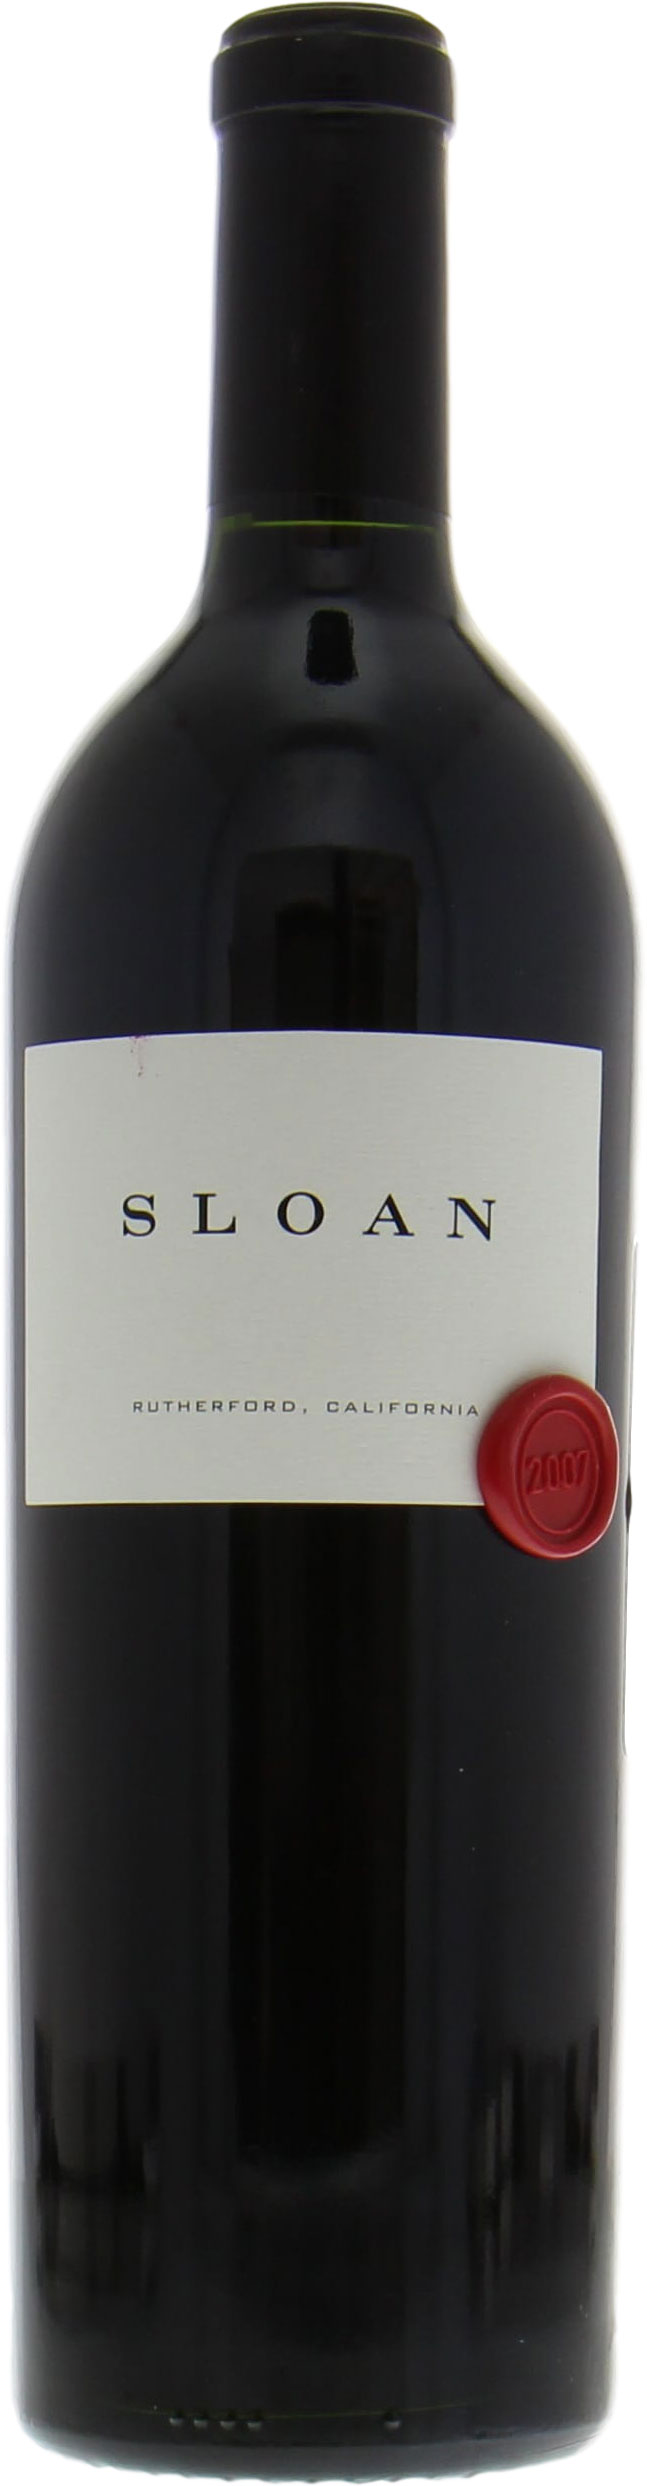 Sloan - Proprietary Red 2007 From Original Wooden Case